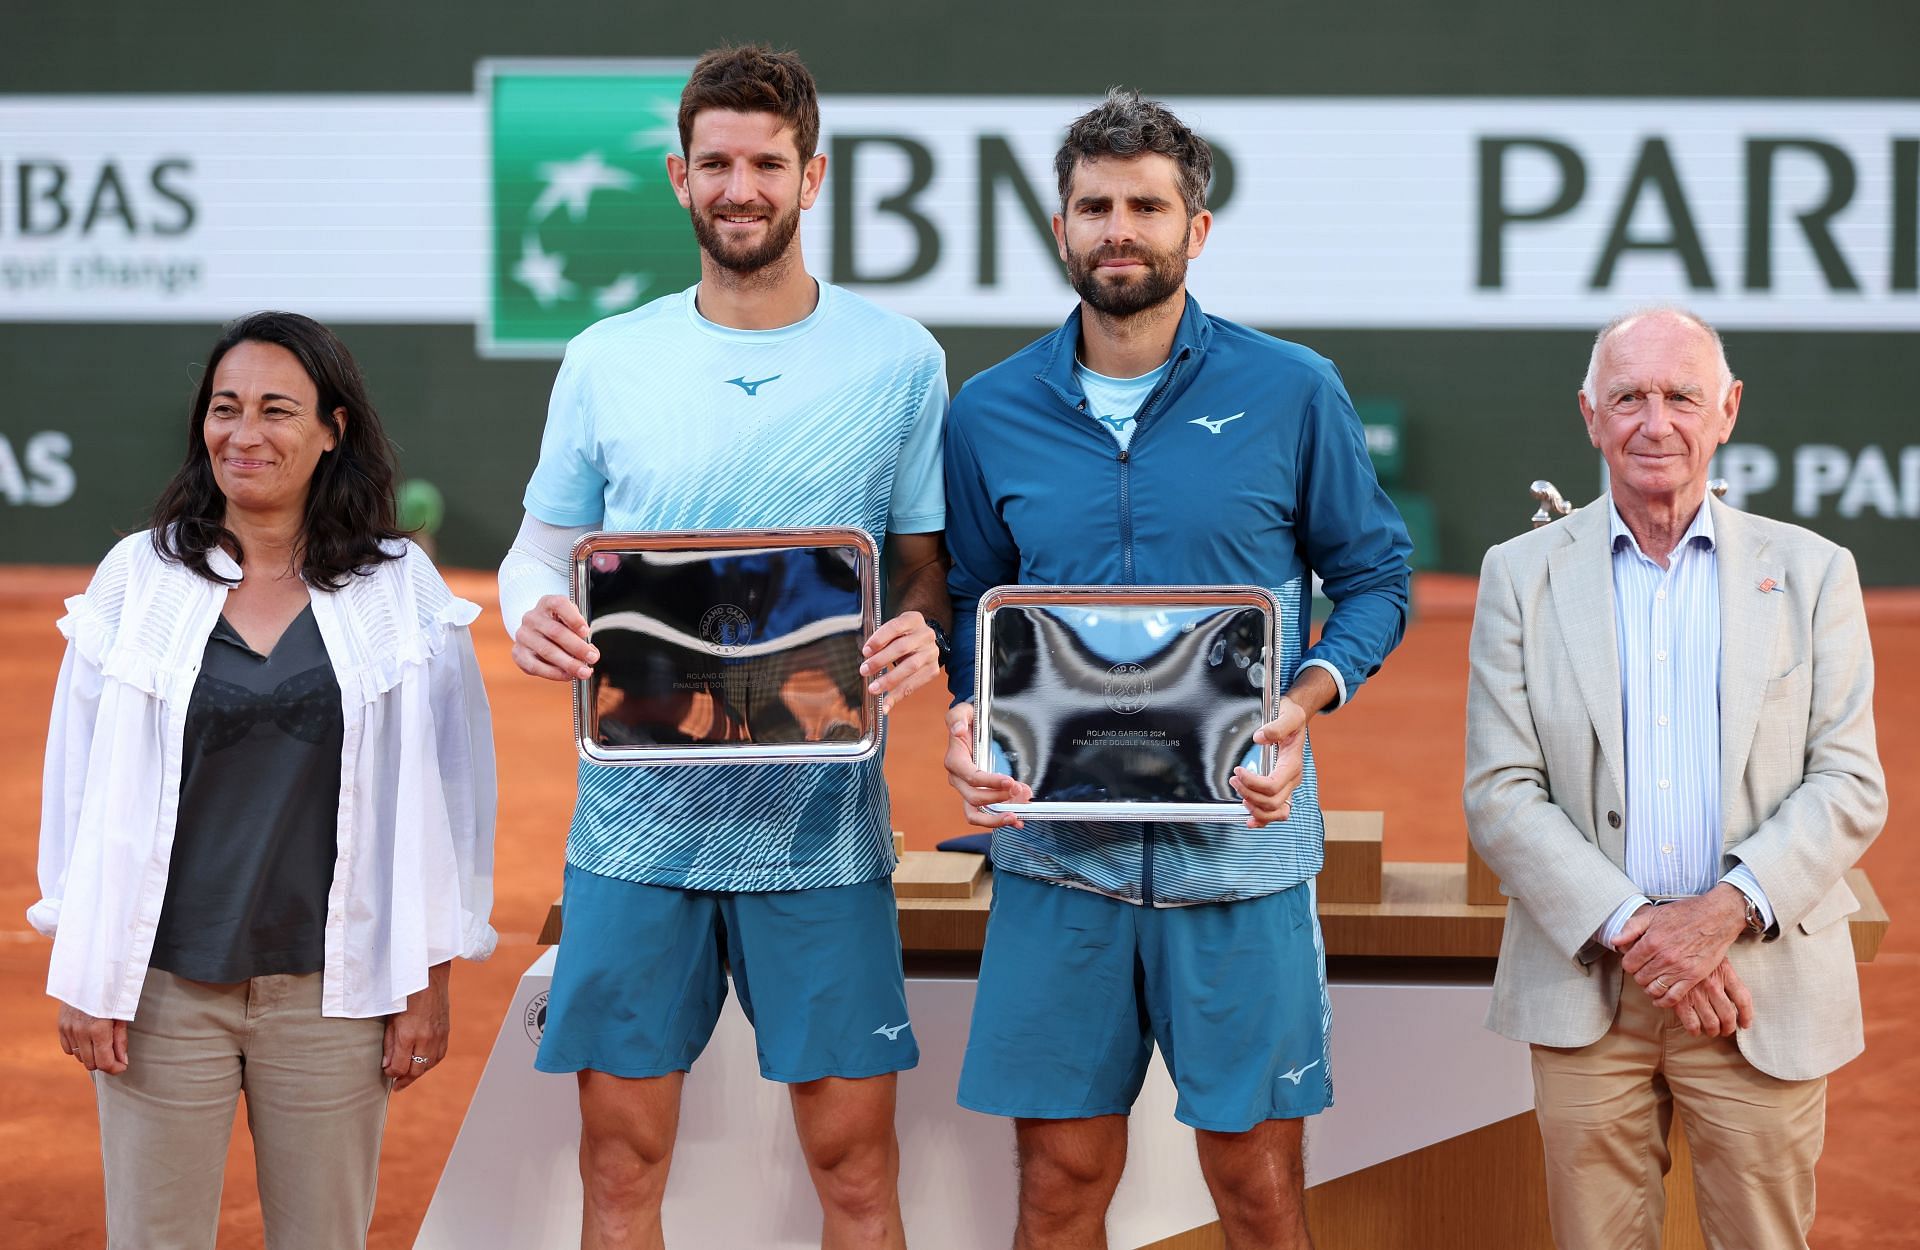 Bolelli and Vavassori with their French Open runer-up trophies